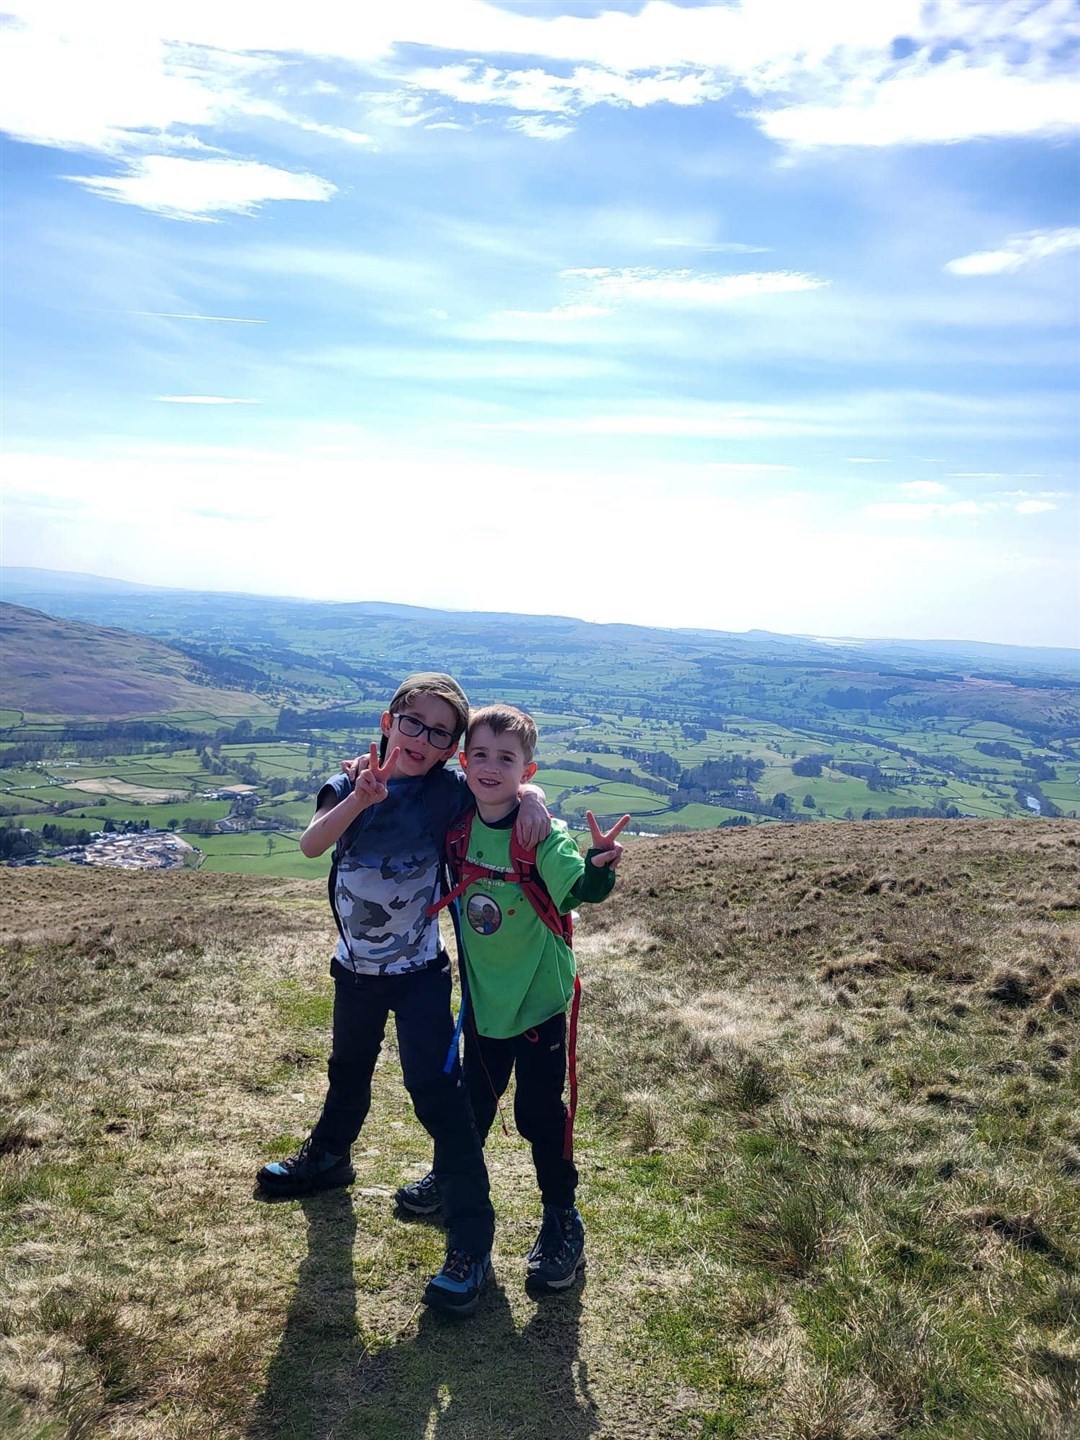 Six-year-old Oscar Burrow (right) will be joined in the Three Peaks Challenge by his friend, Ollie Perkins (Matt Burrow/PA)